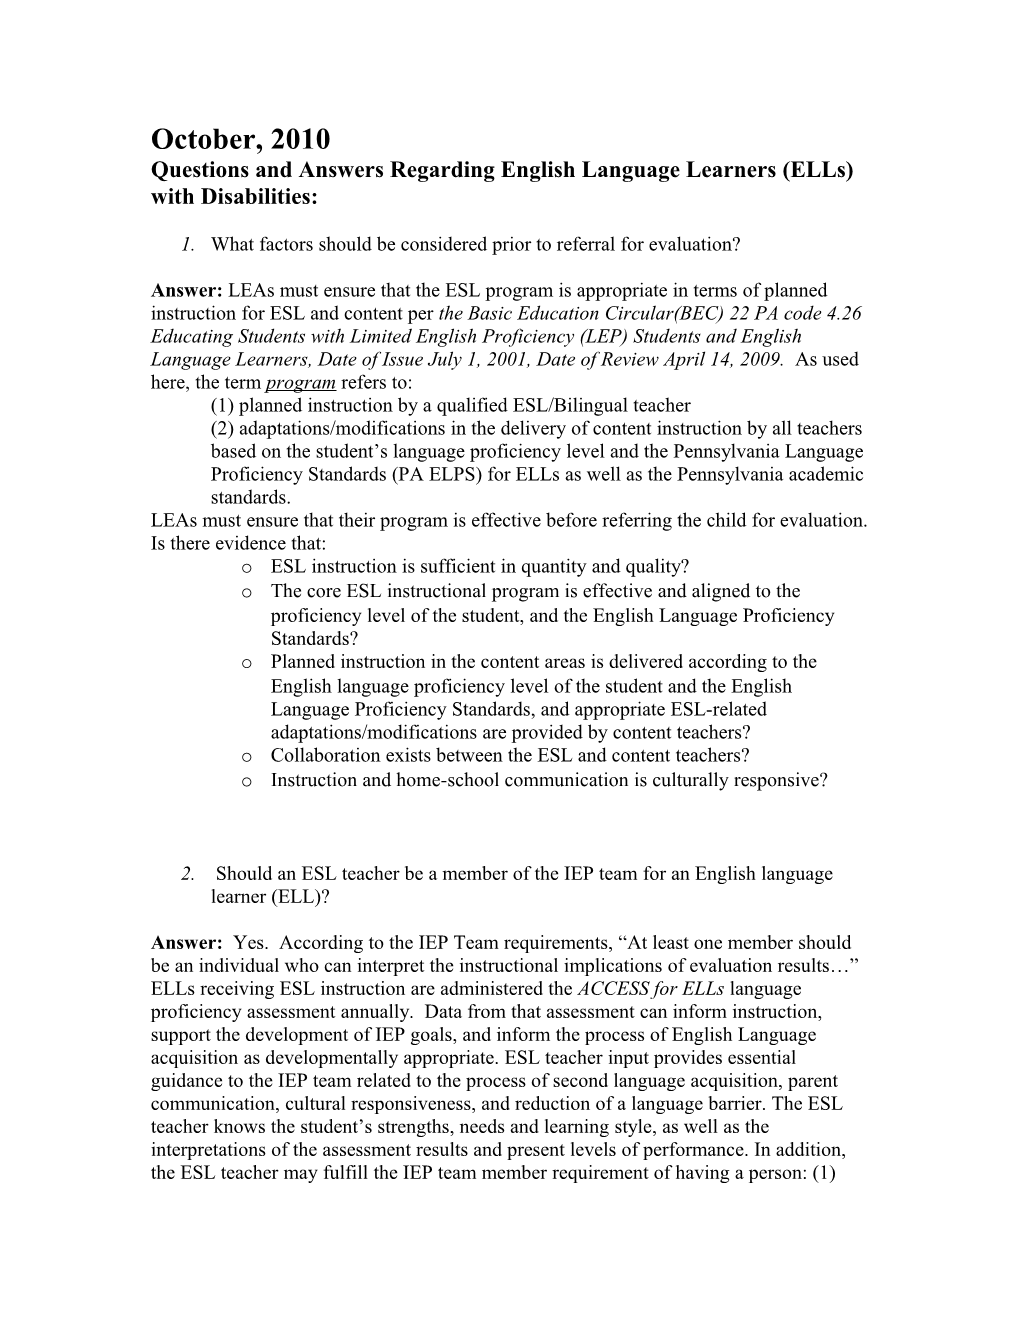 Questions and Answers Regarding ESL Students with Disabilities